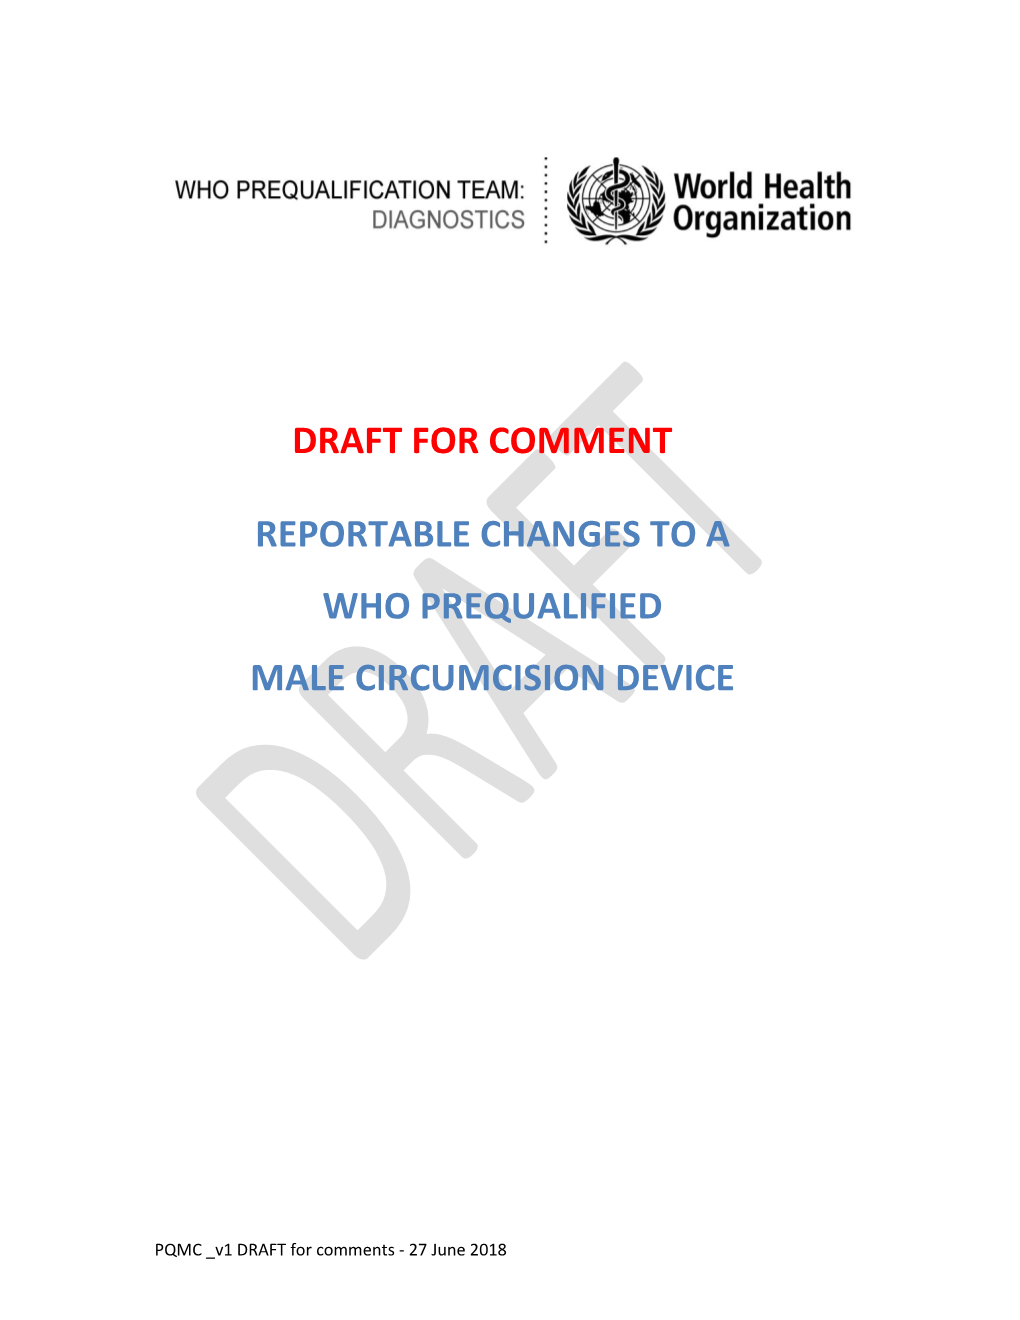 Reportable Changes to a Who Prequalified Male Circumcision Device